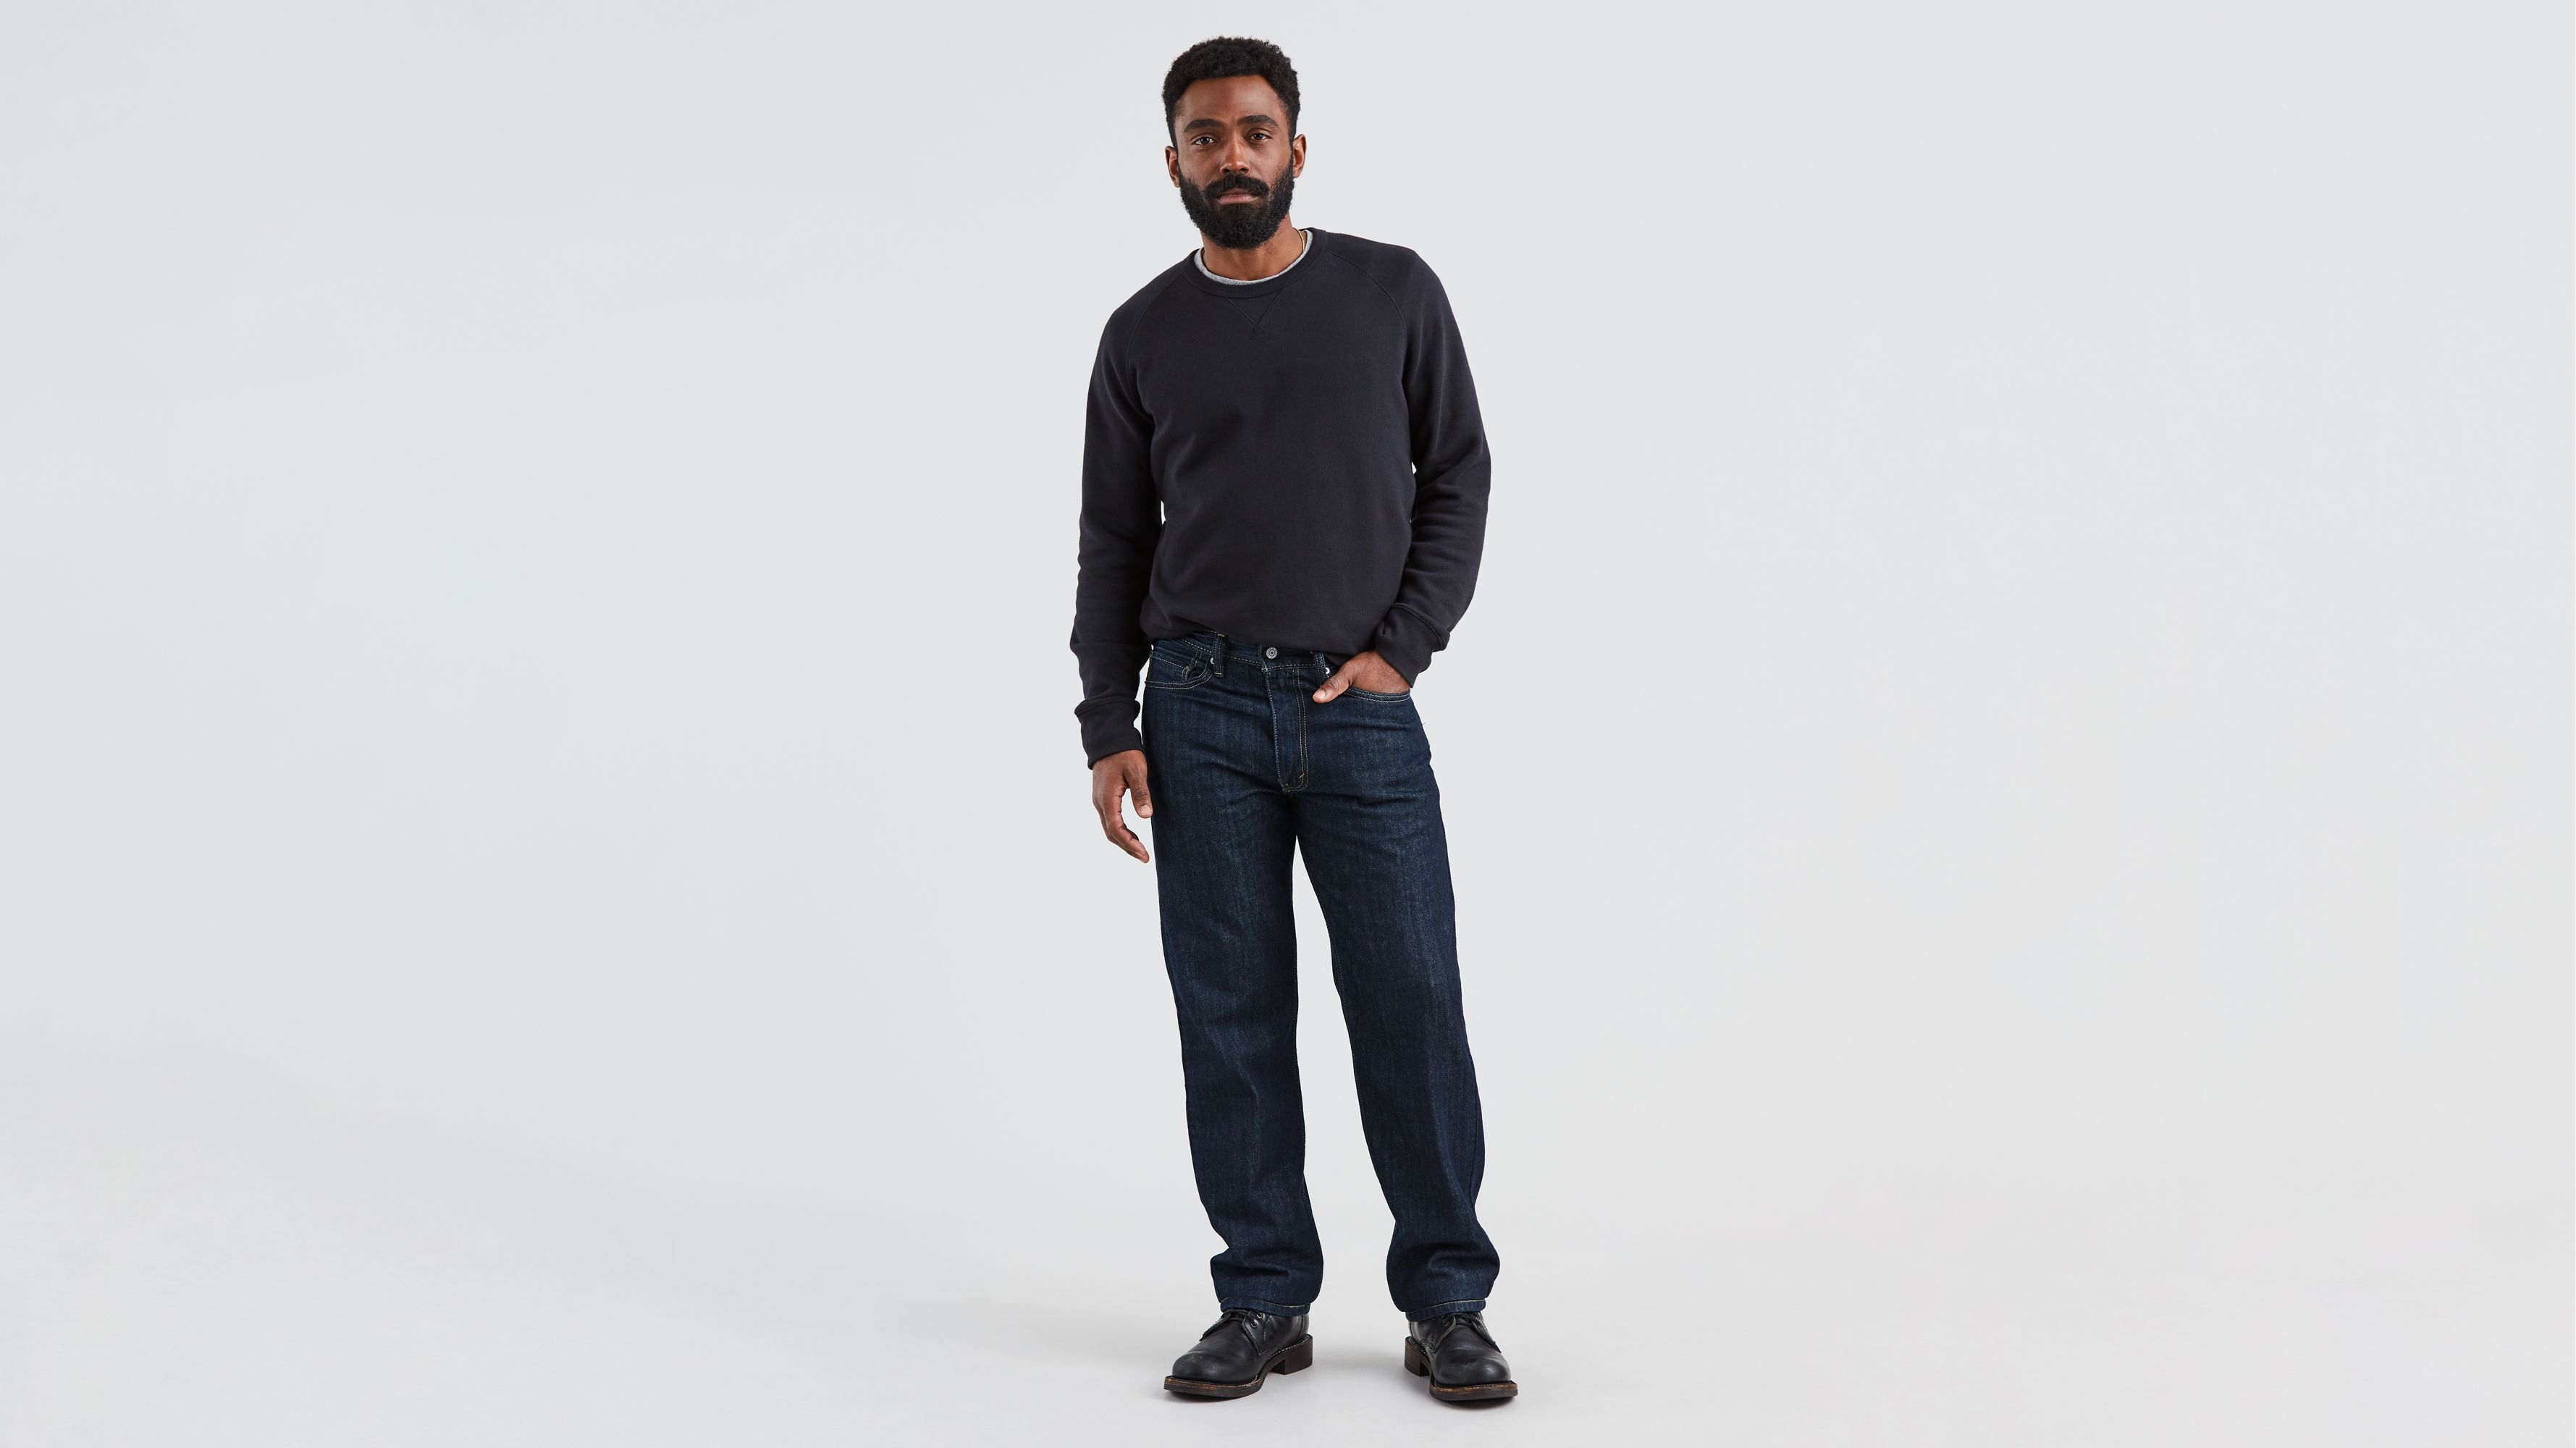 550™ Relaxed Fit Men's Jeans - Dark Wash | Levi's® US